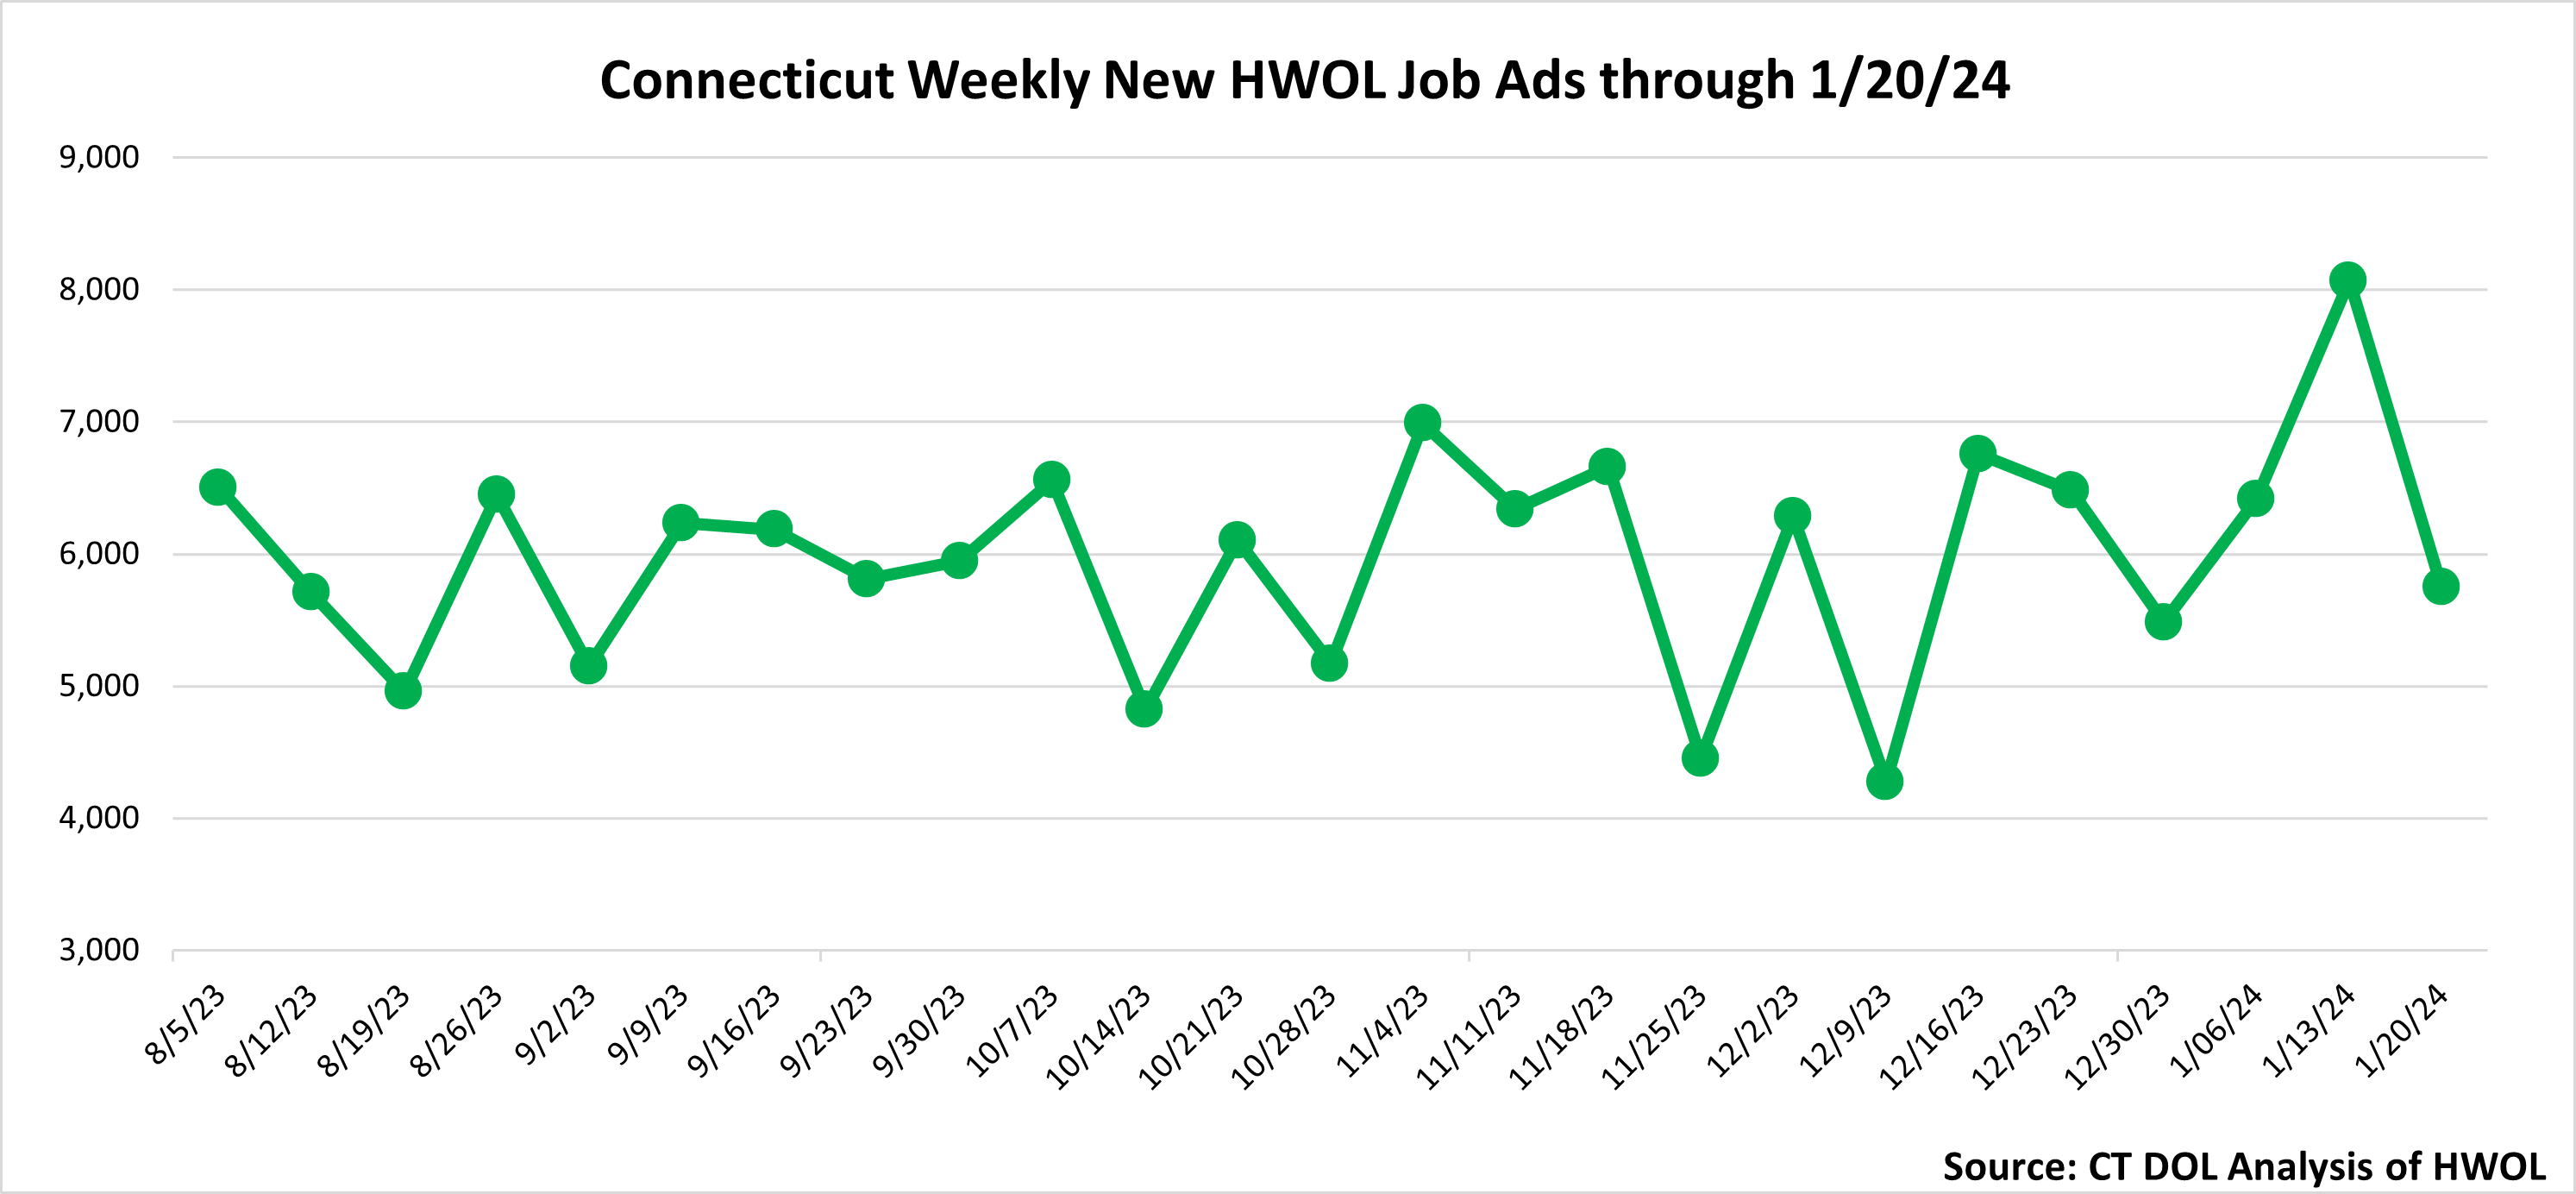 Connecticut Weekly Statewide New HWOL Job Ads through 1/20/24